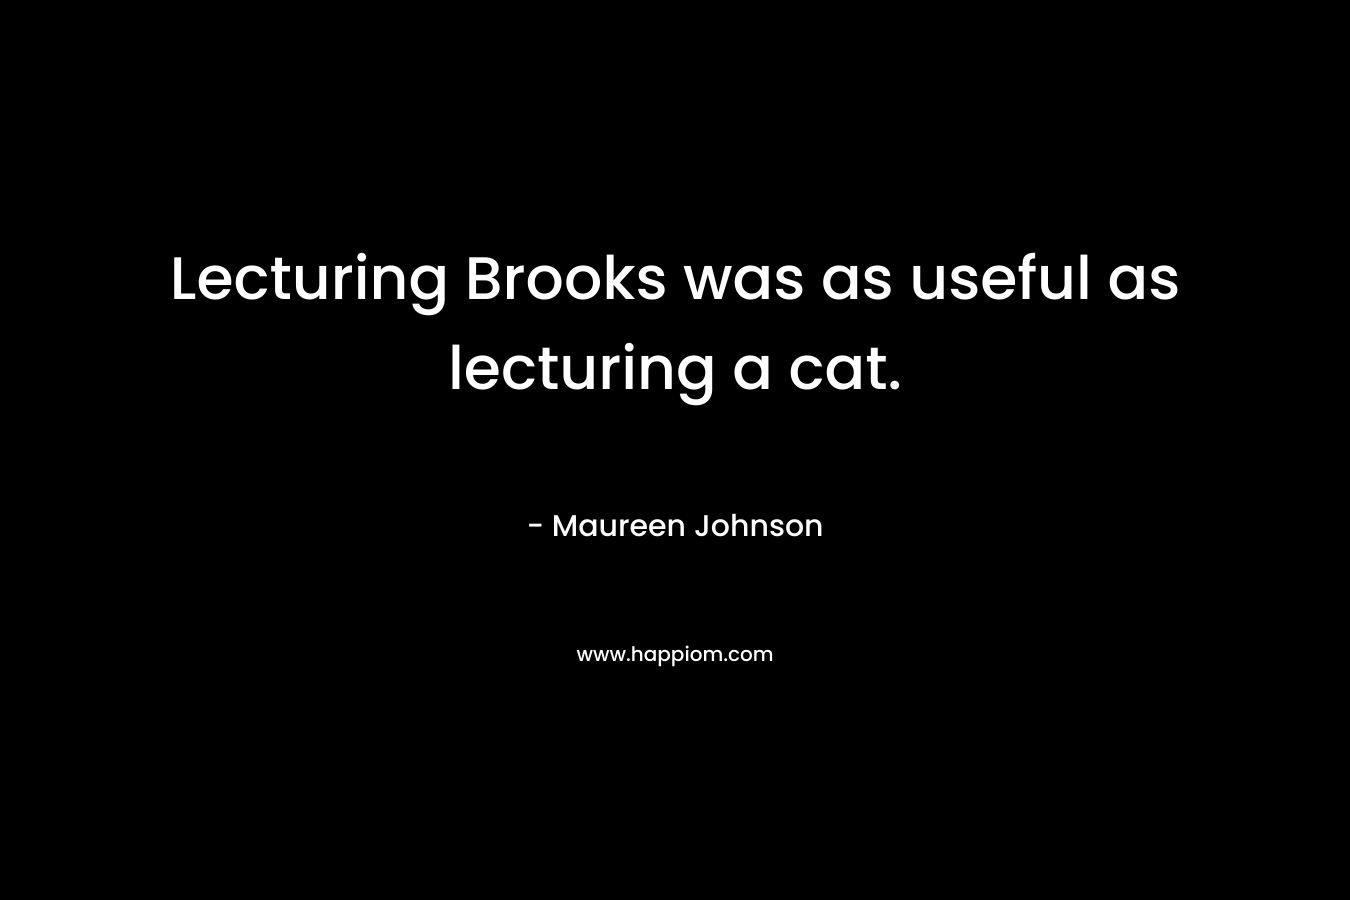 Lecturing Brooks was as useful as lecturing a cat. – Maureen Johnson